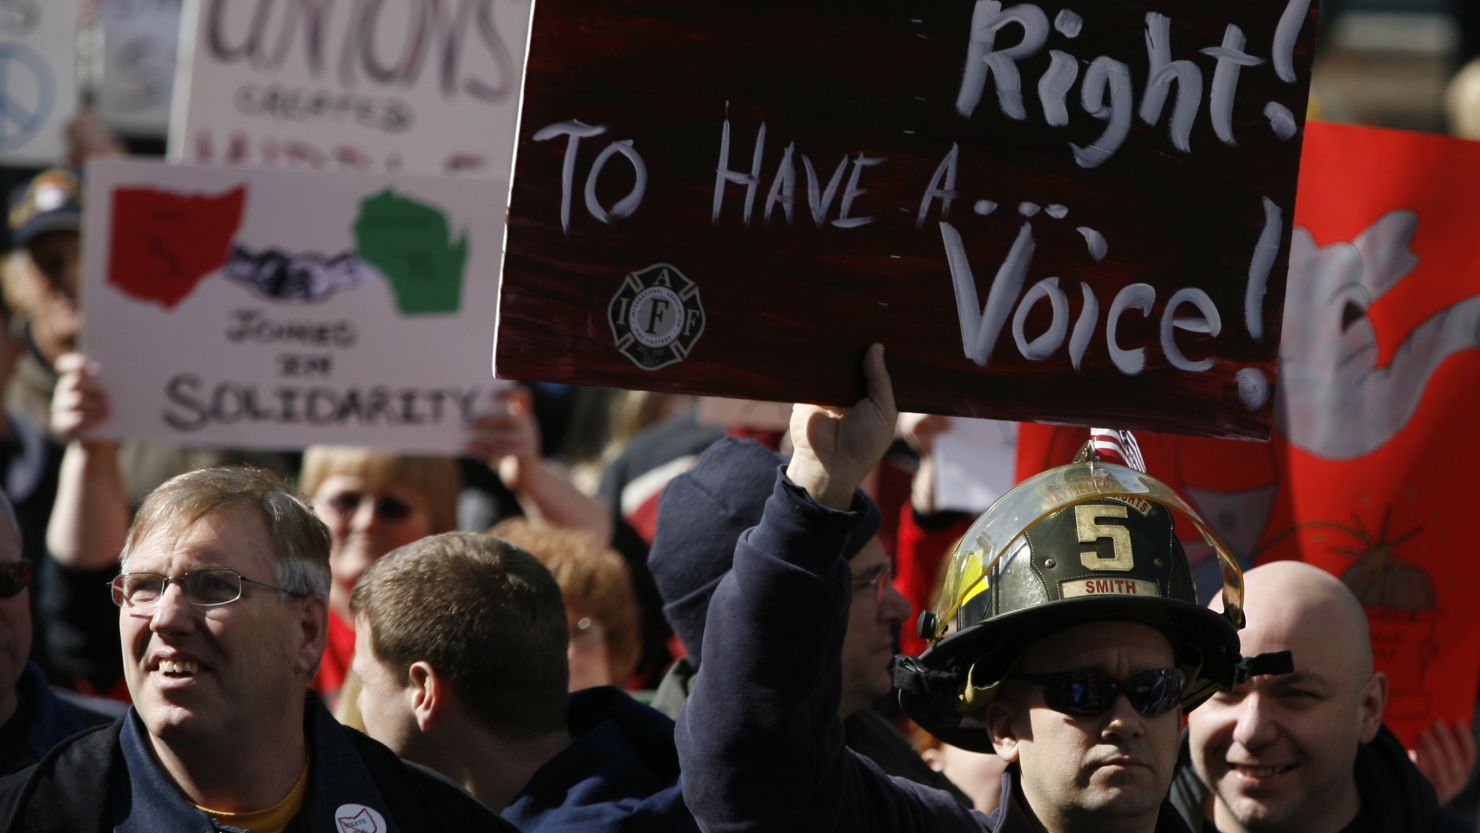 Union supporters fought back against Gov. John Kasich's bill limiting rights of public employee unions in Ohio.